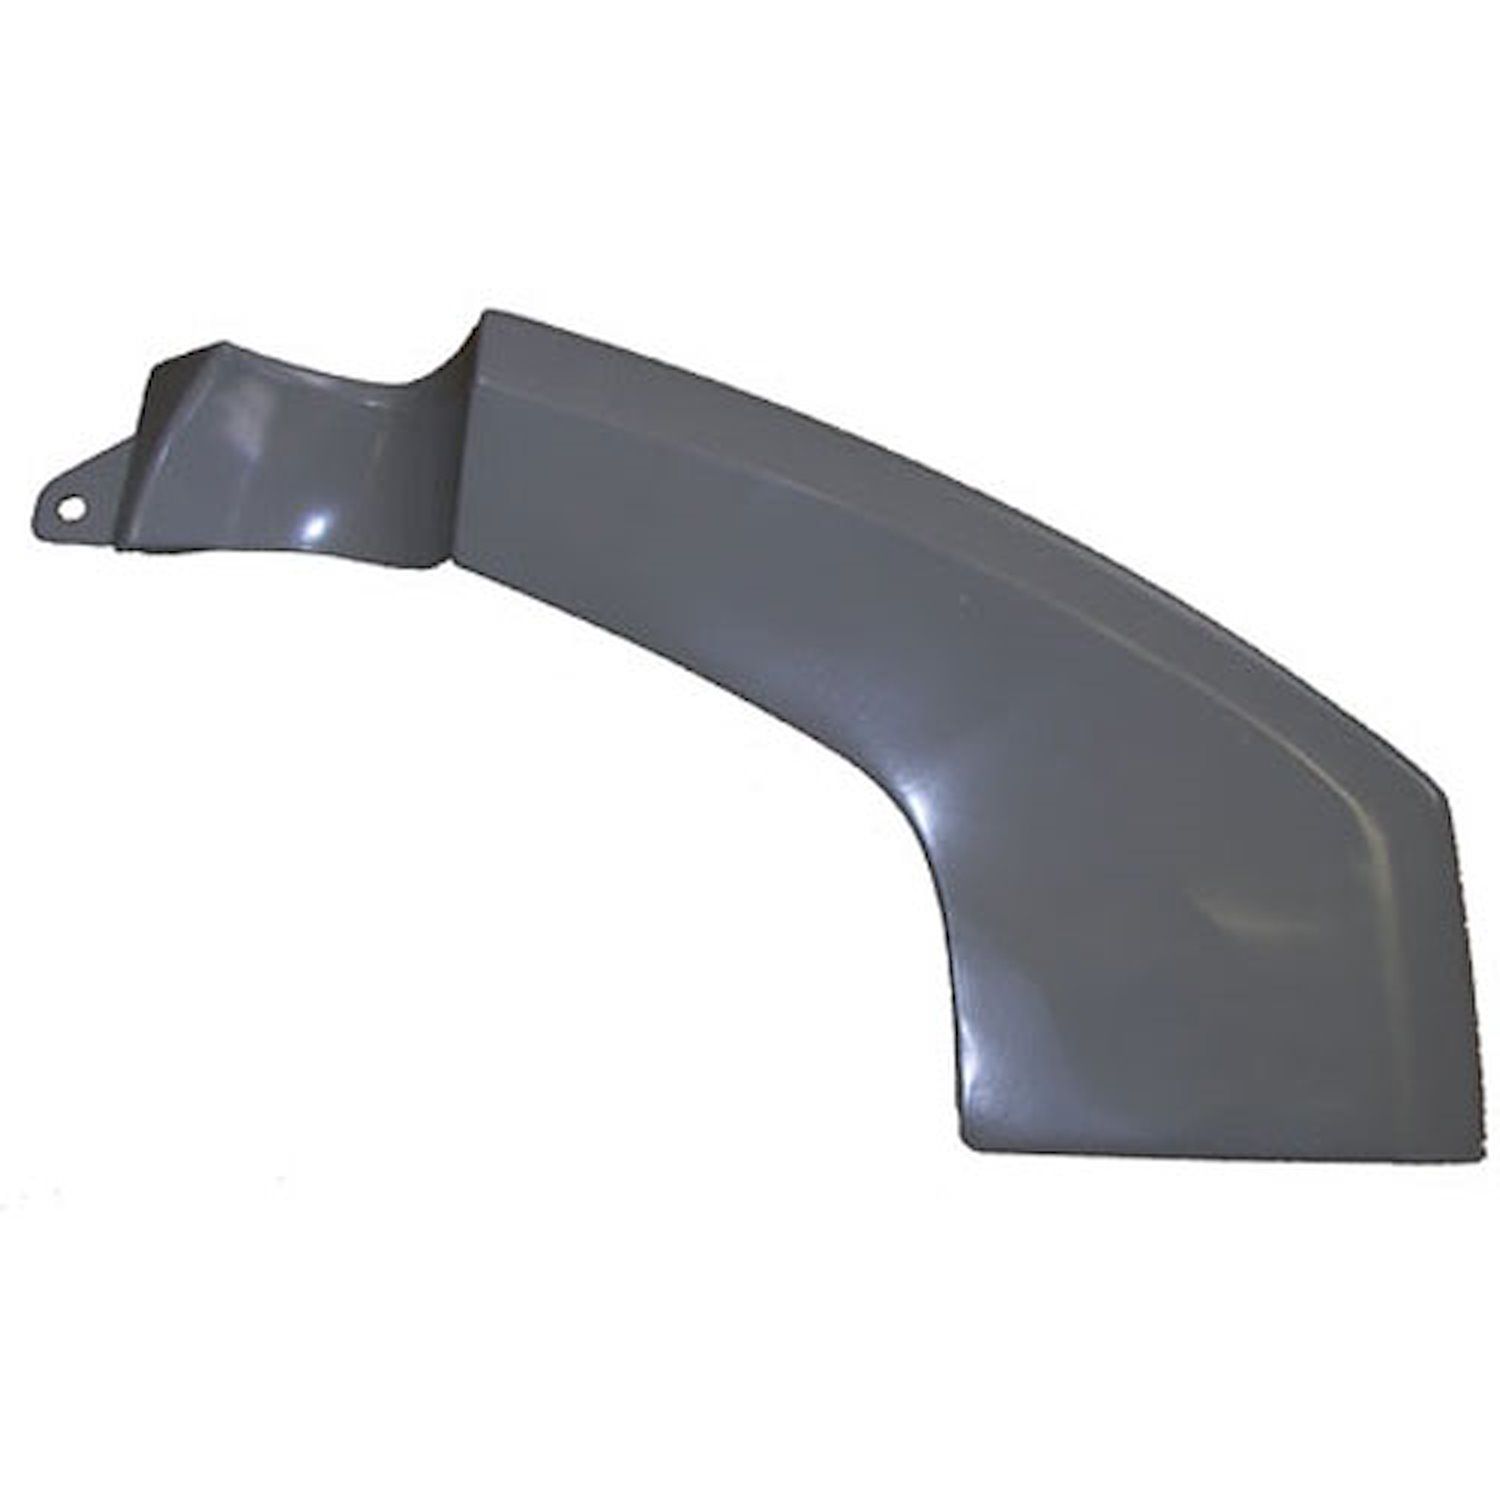 QUARTER PANEL. EXTENSION LH MUSTANG 71-73 COUPE/CONV.